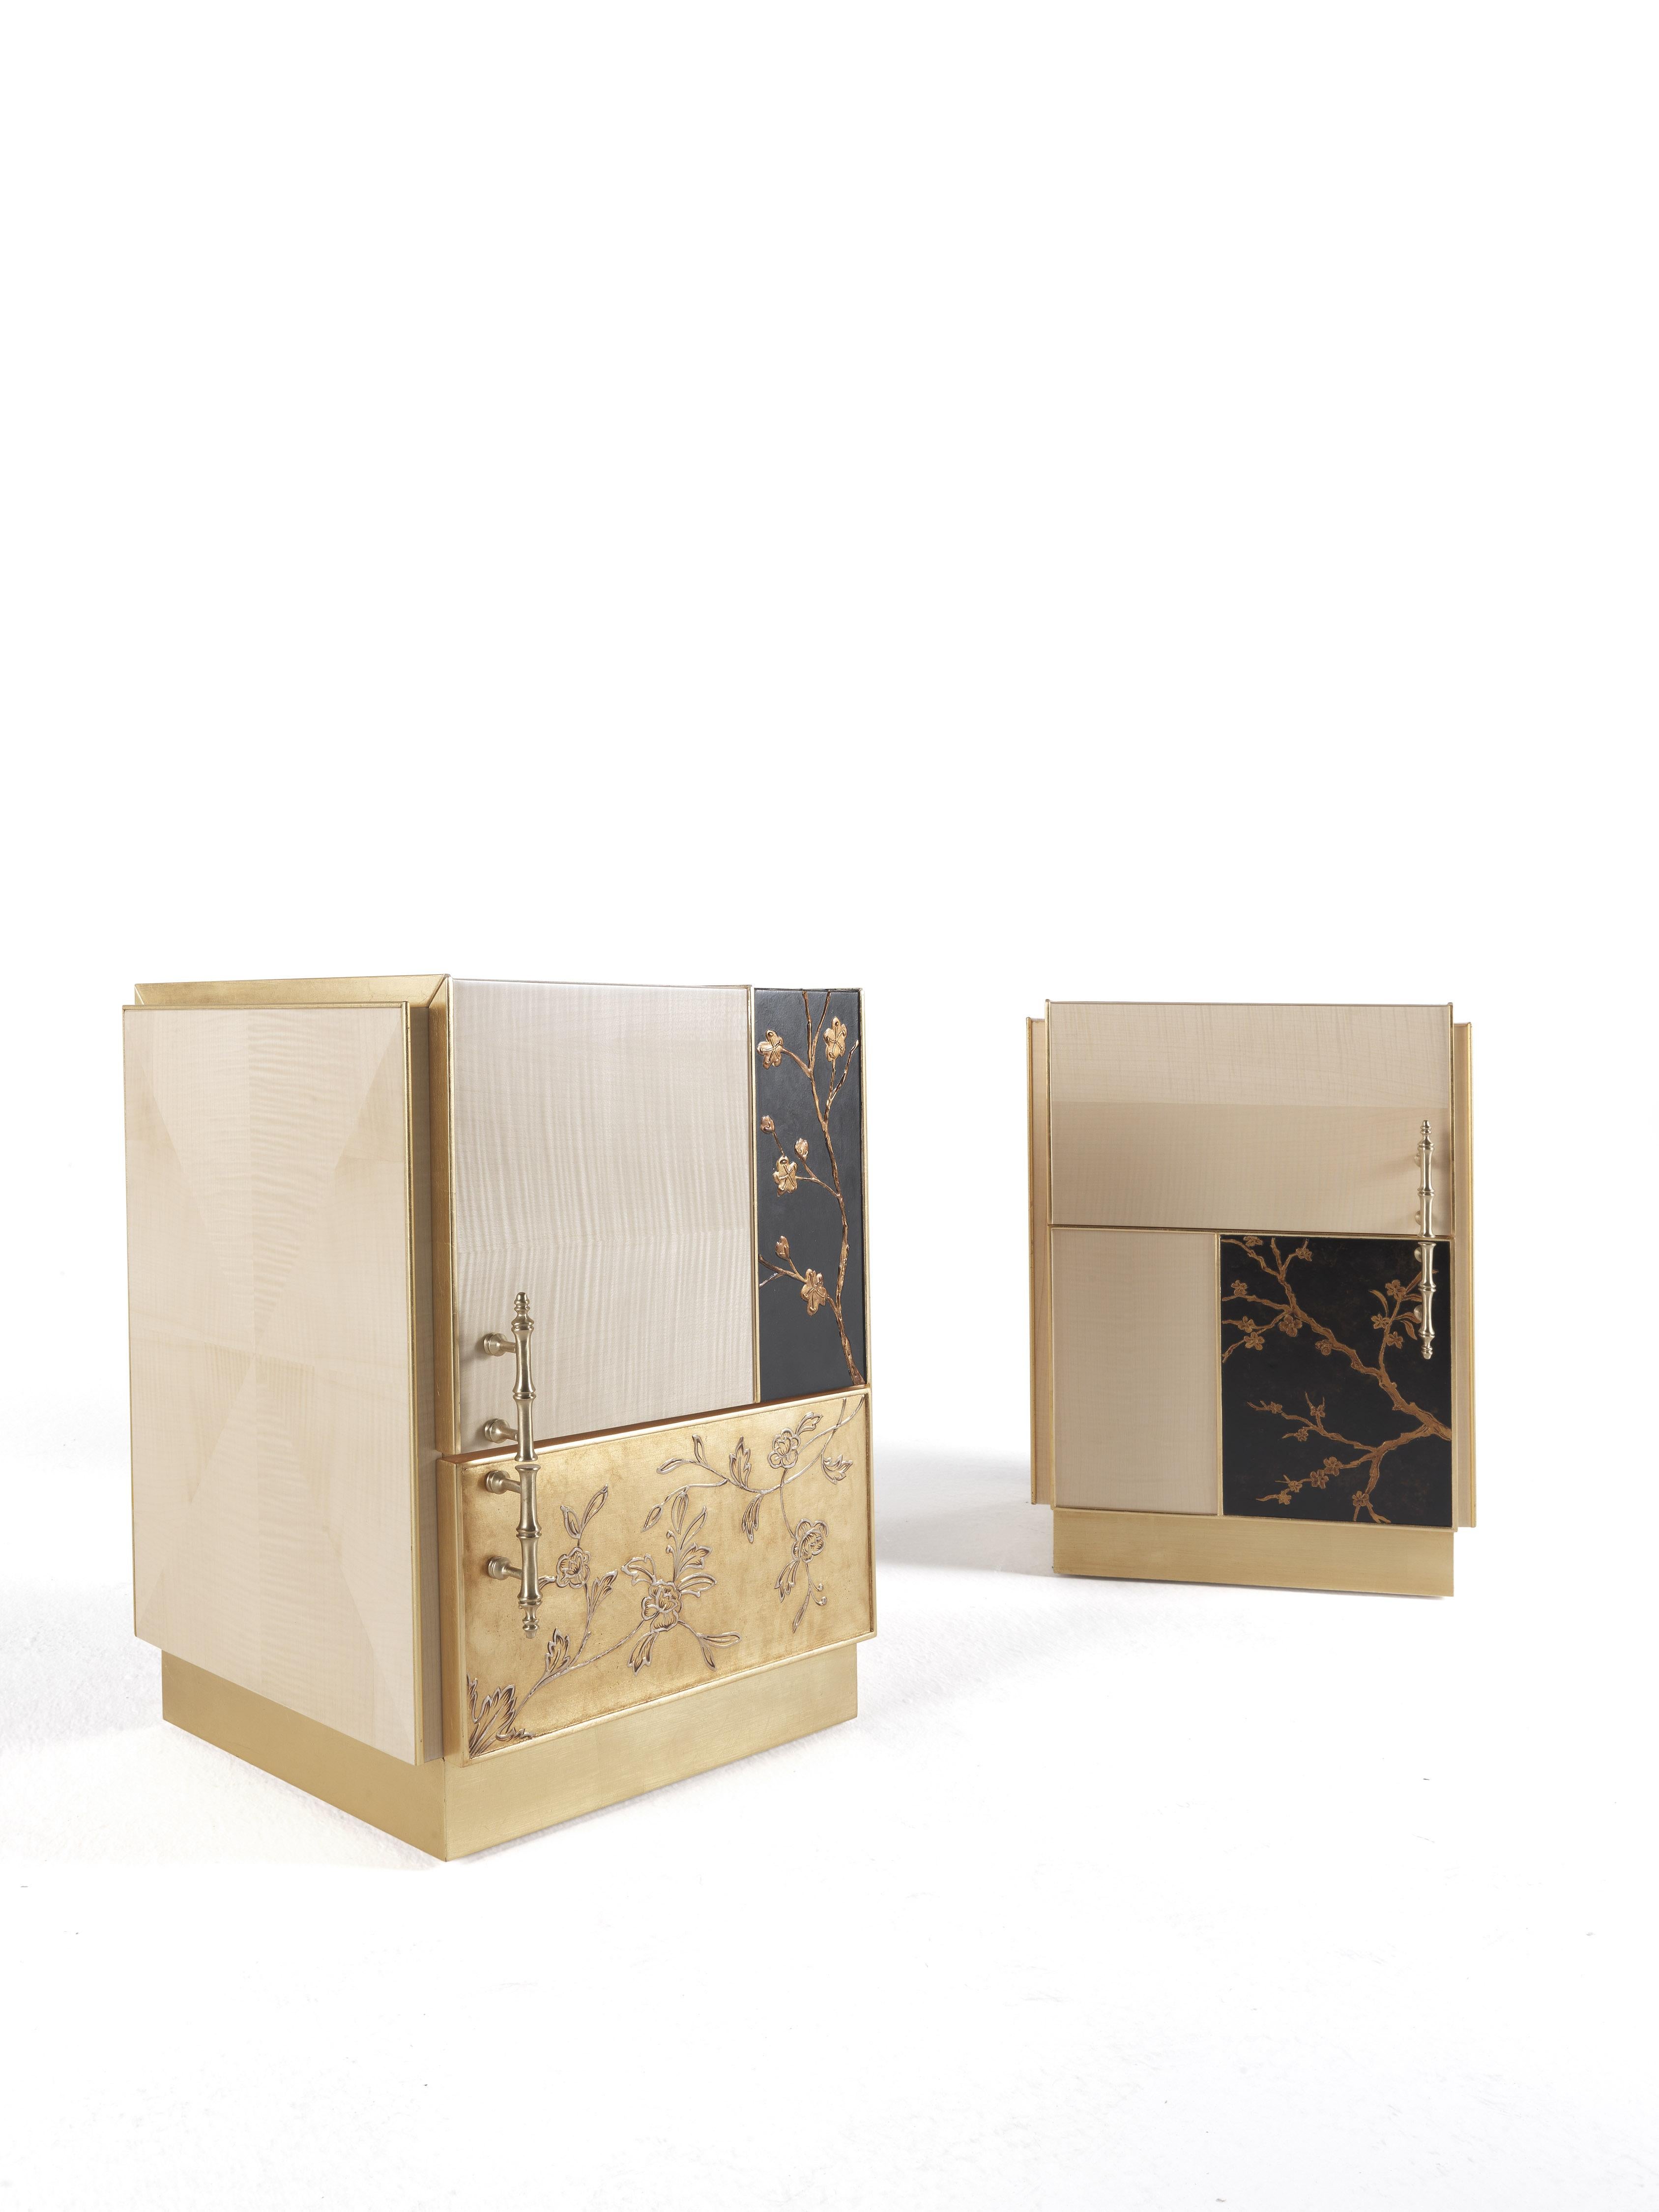 Italian 21st Century Ukiyo Side Table in Wood with Panels Decorated in Relief Plaster For Sale